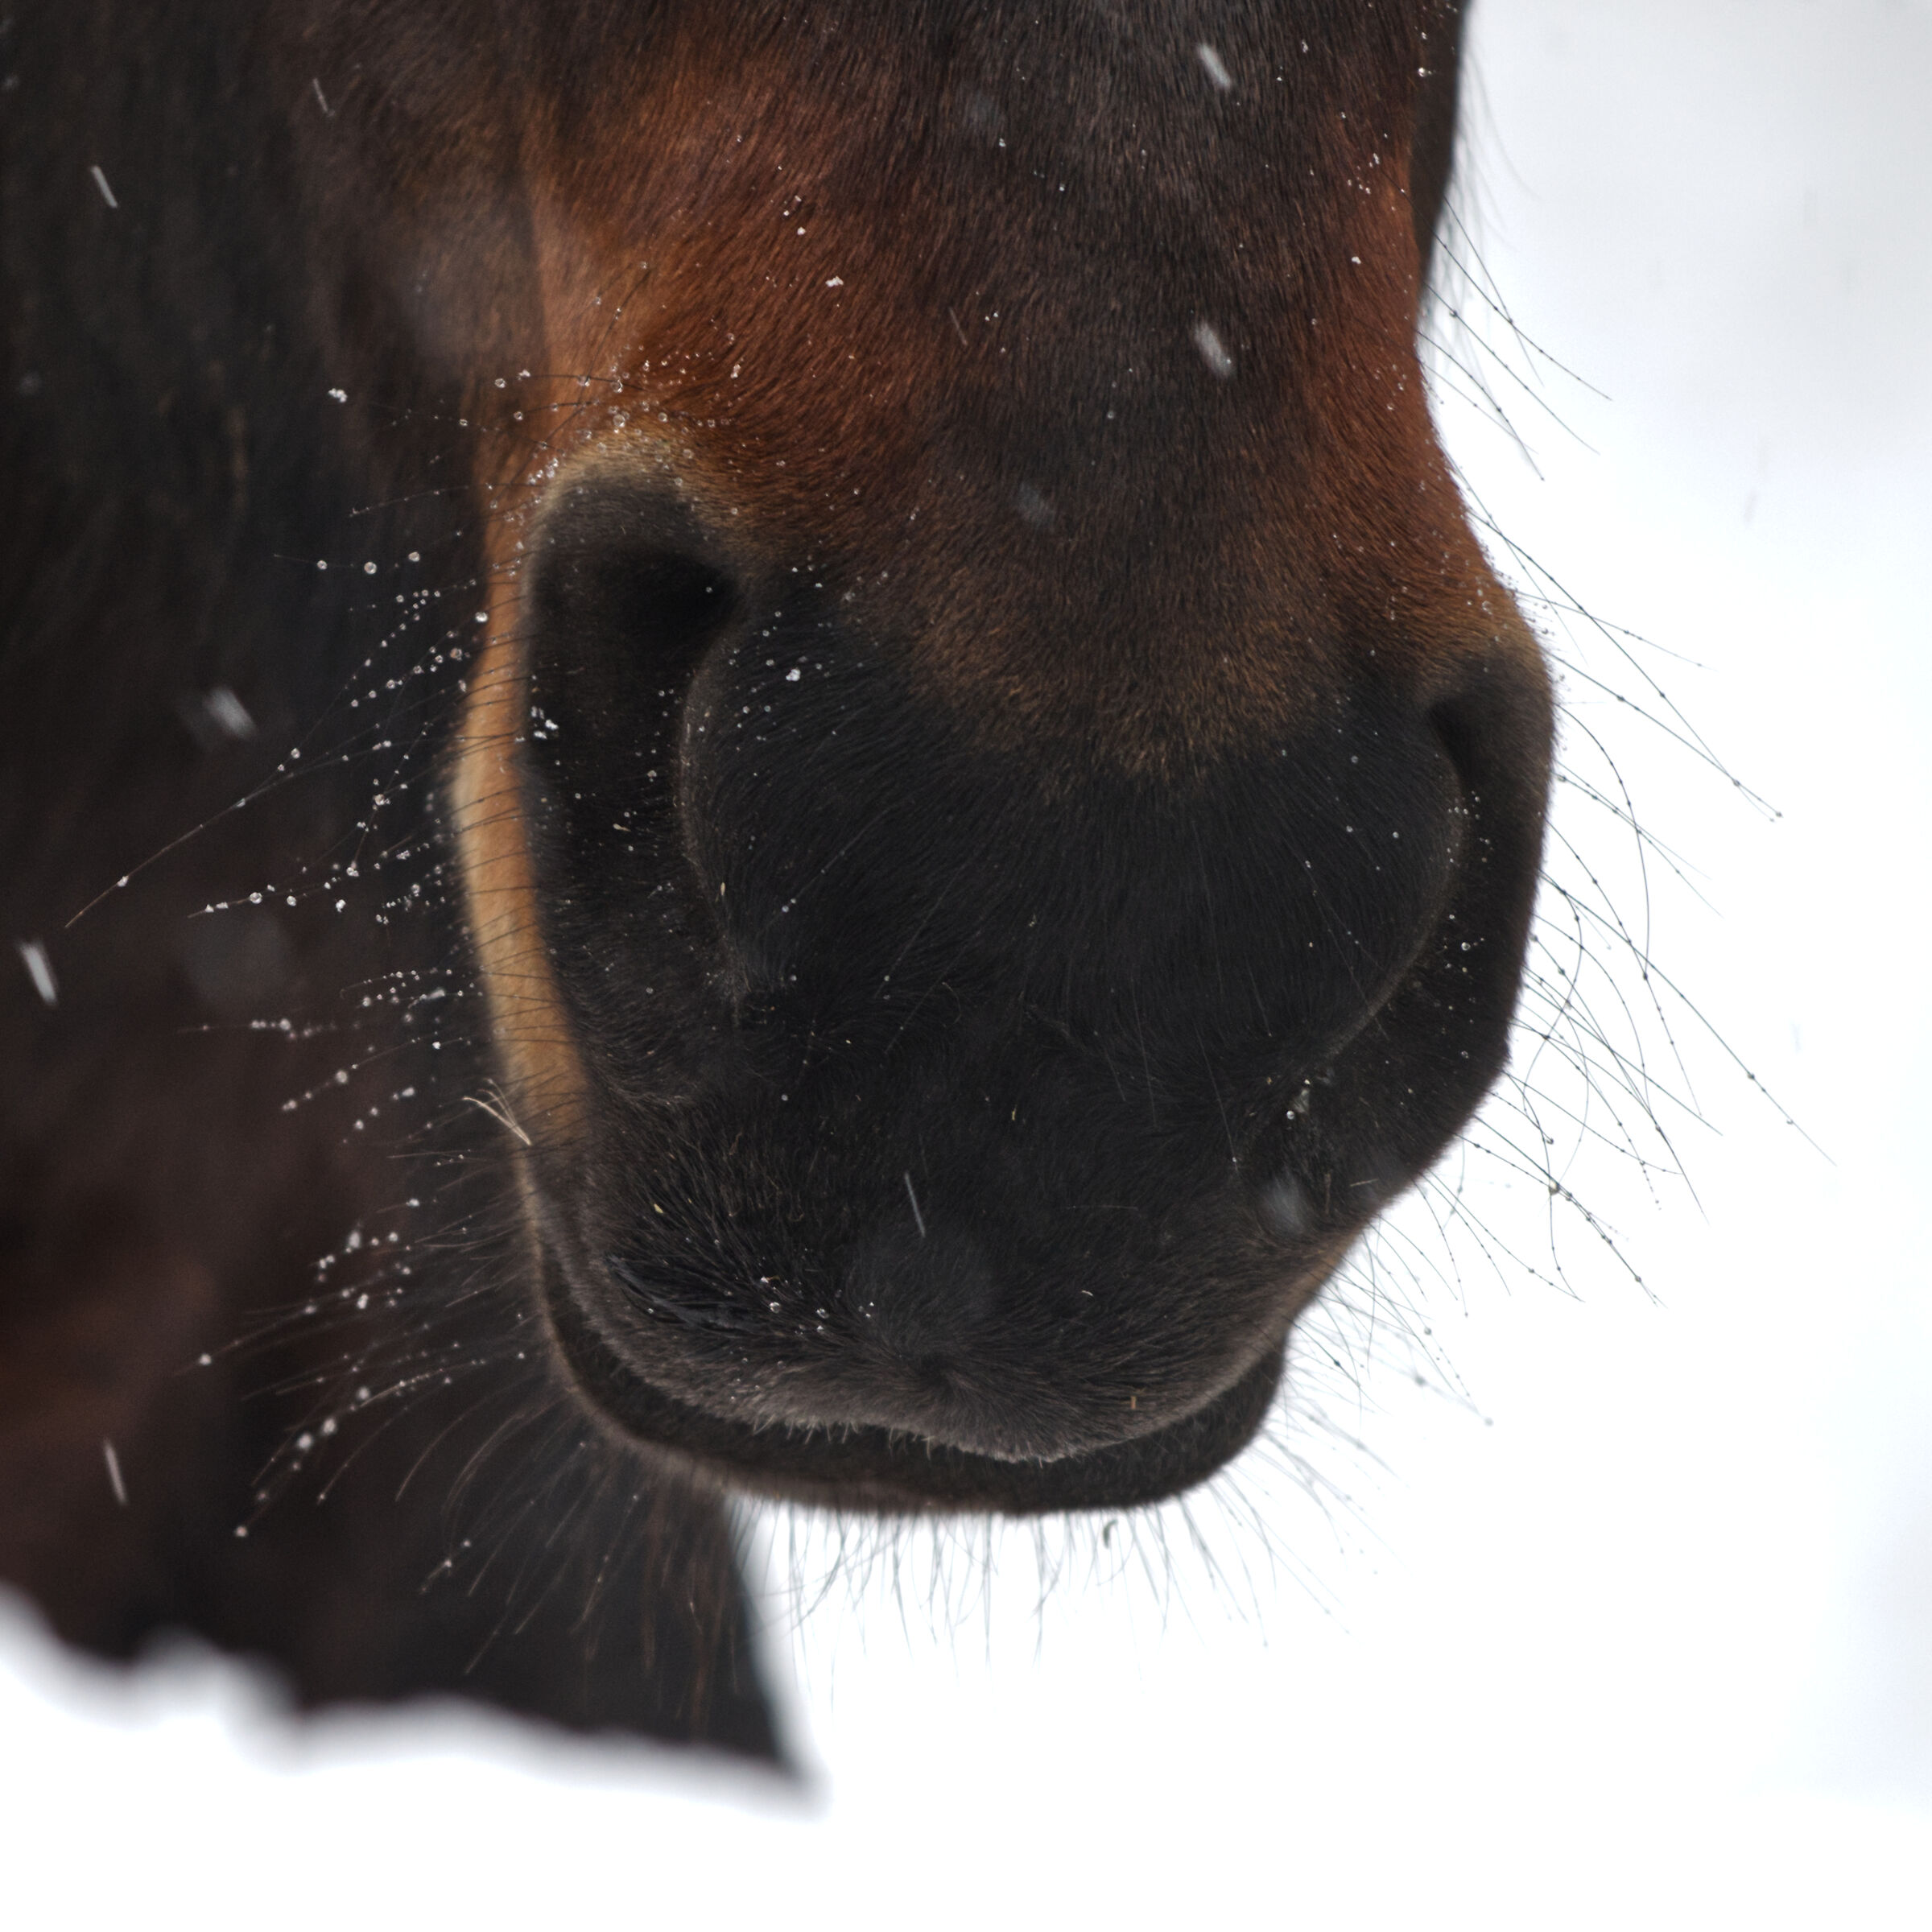 Nose and Snow...